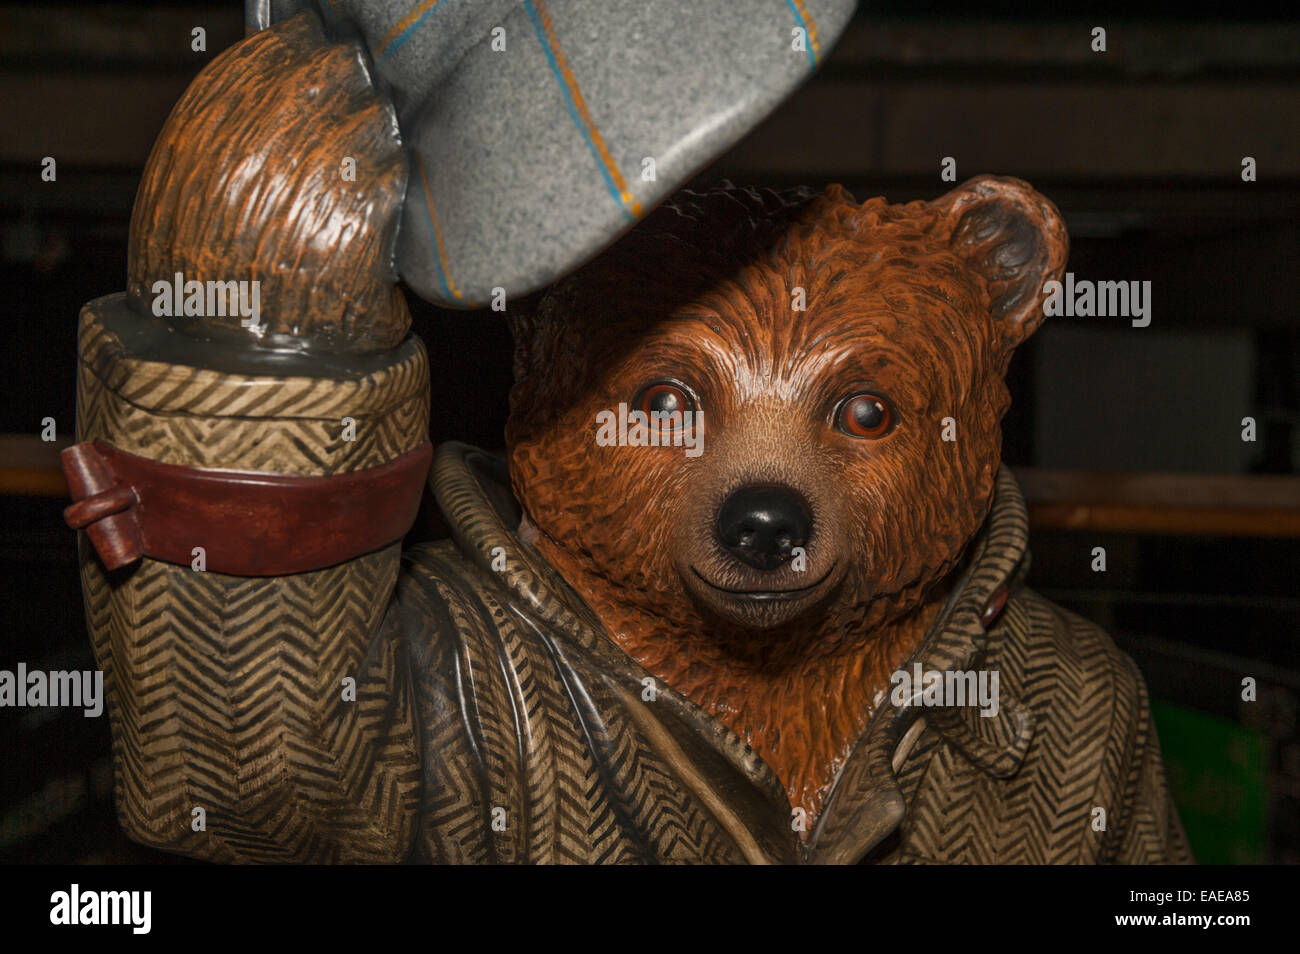 Museum of London, UK. 13th November, 2014. From Darkest Peru to London Wall - Paddington Bear heads to the Museum of London from 14 November 2014 - 4 January 2015. The world’s much-loved, well-mannered bear gets set for his big-screen debut in the new film PADDINGTON this November, the Museum of London is celebrating the small stowaway from Darkest Peru and his London adventures with a new exhibition. The Museum also has a life-size Paddington statue designed by BBC Sherlock’s leading man, Benedict Cumberbatch as part of London’s Paddington Trail. Credit:  Malcolm Park editorial/Alamy Live New Stock Photo